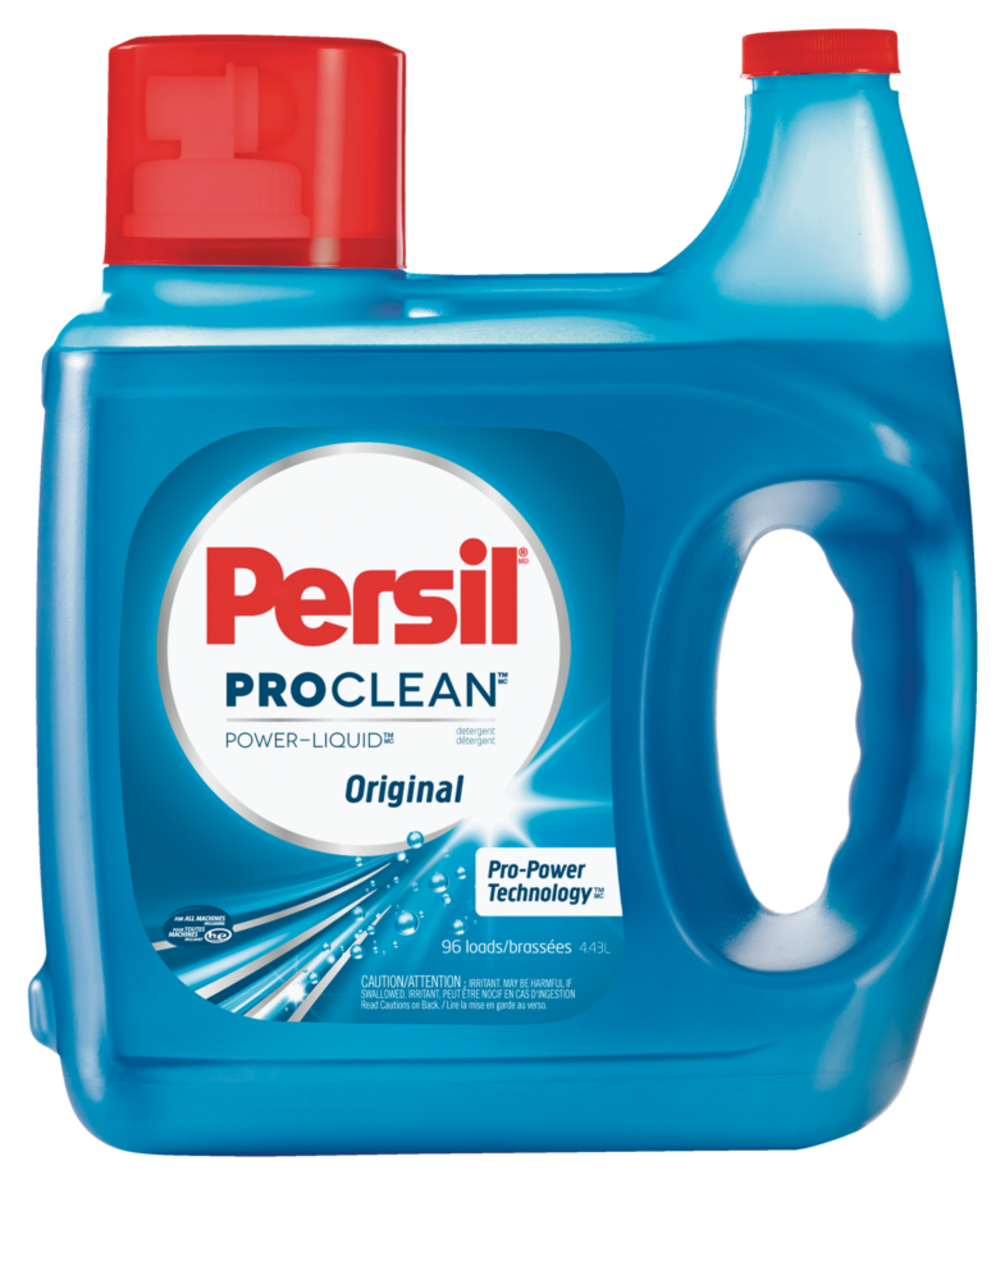 https://media-www.canadiantire.ca/product/living/home-essentials/laundry-hand-dish-cleaning-solutions/1530332/persil-liquid-detergent-original-4-43l-3a89efbb-fbf0-4587-90bb-57a8bf1866bb.png?imdensity=1&imwidth=640&impolicy=mZoom